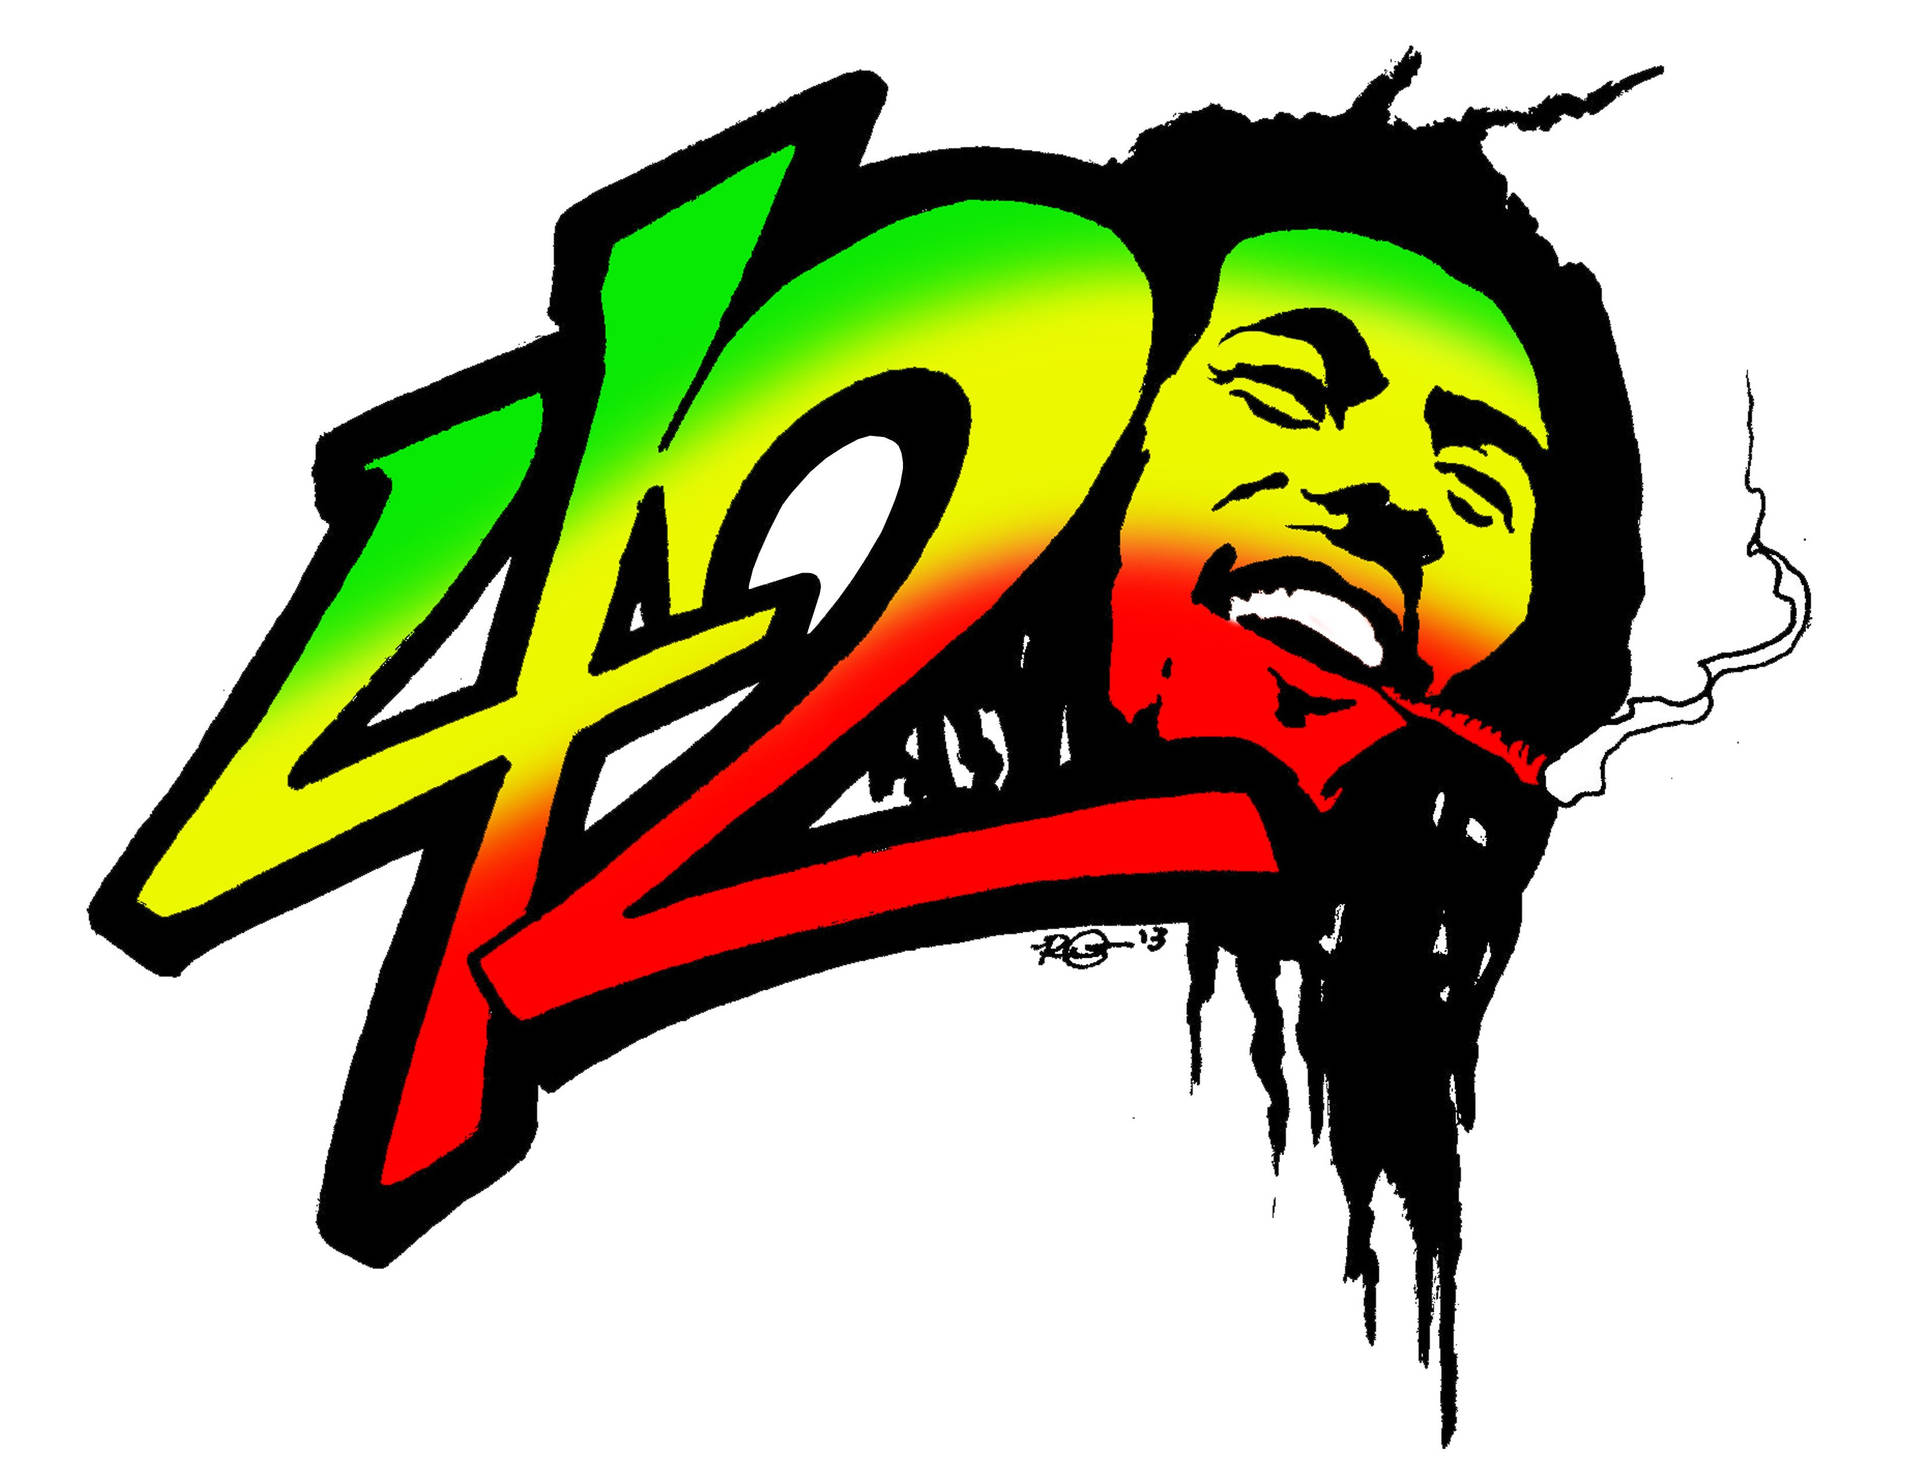 Free 420 Wallpaper Downloads, [100+] 420 Wallpapers for FREE | Wallpapers .com